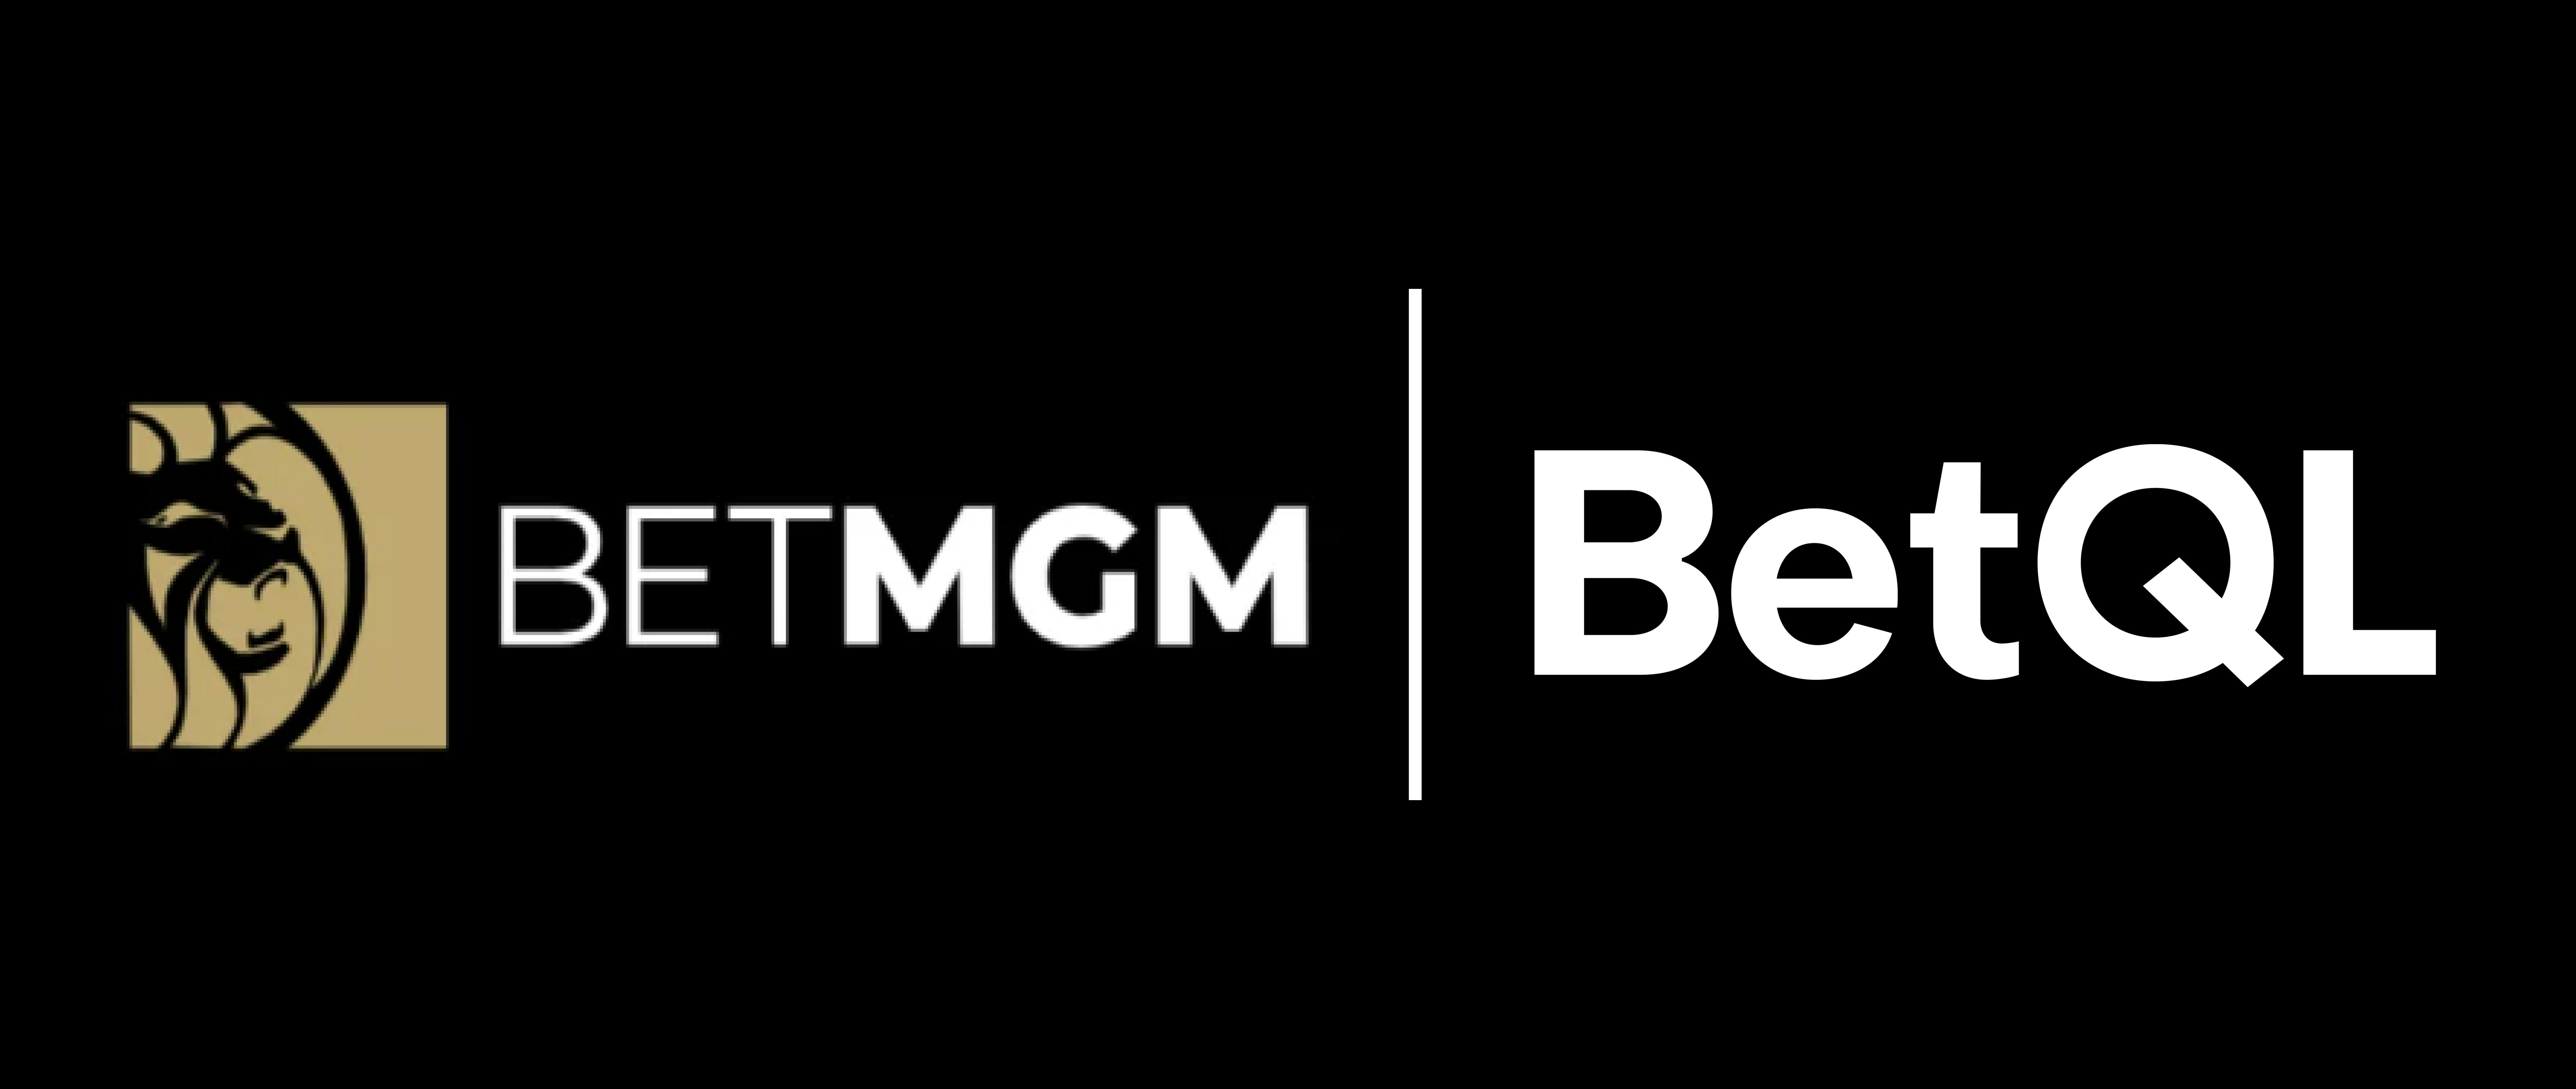 Get BetQL Free for 1 Year with BetMGM!